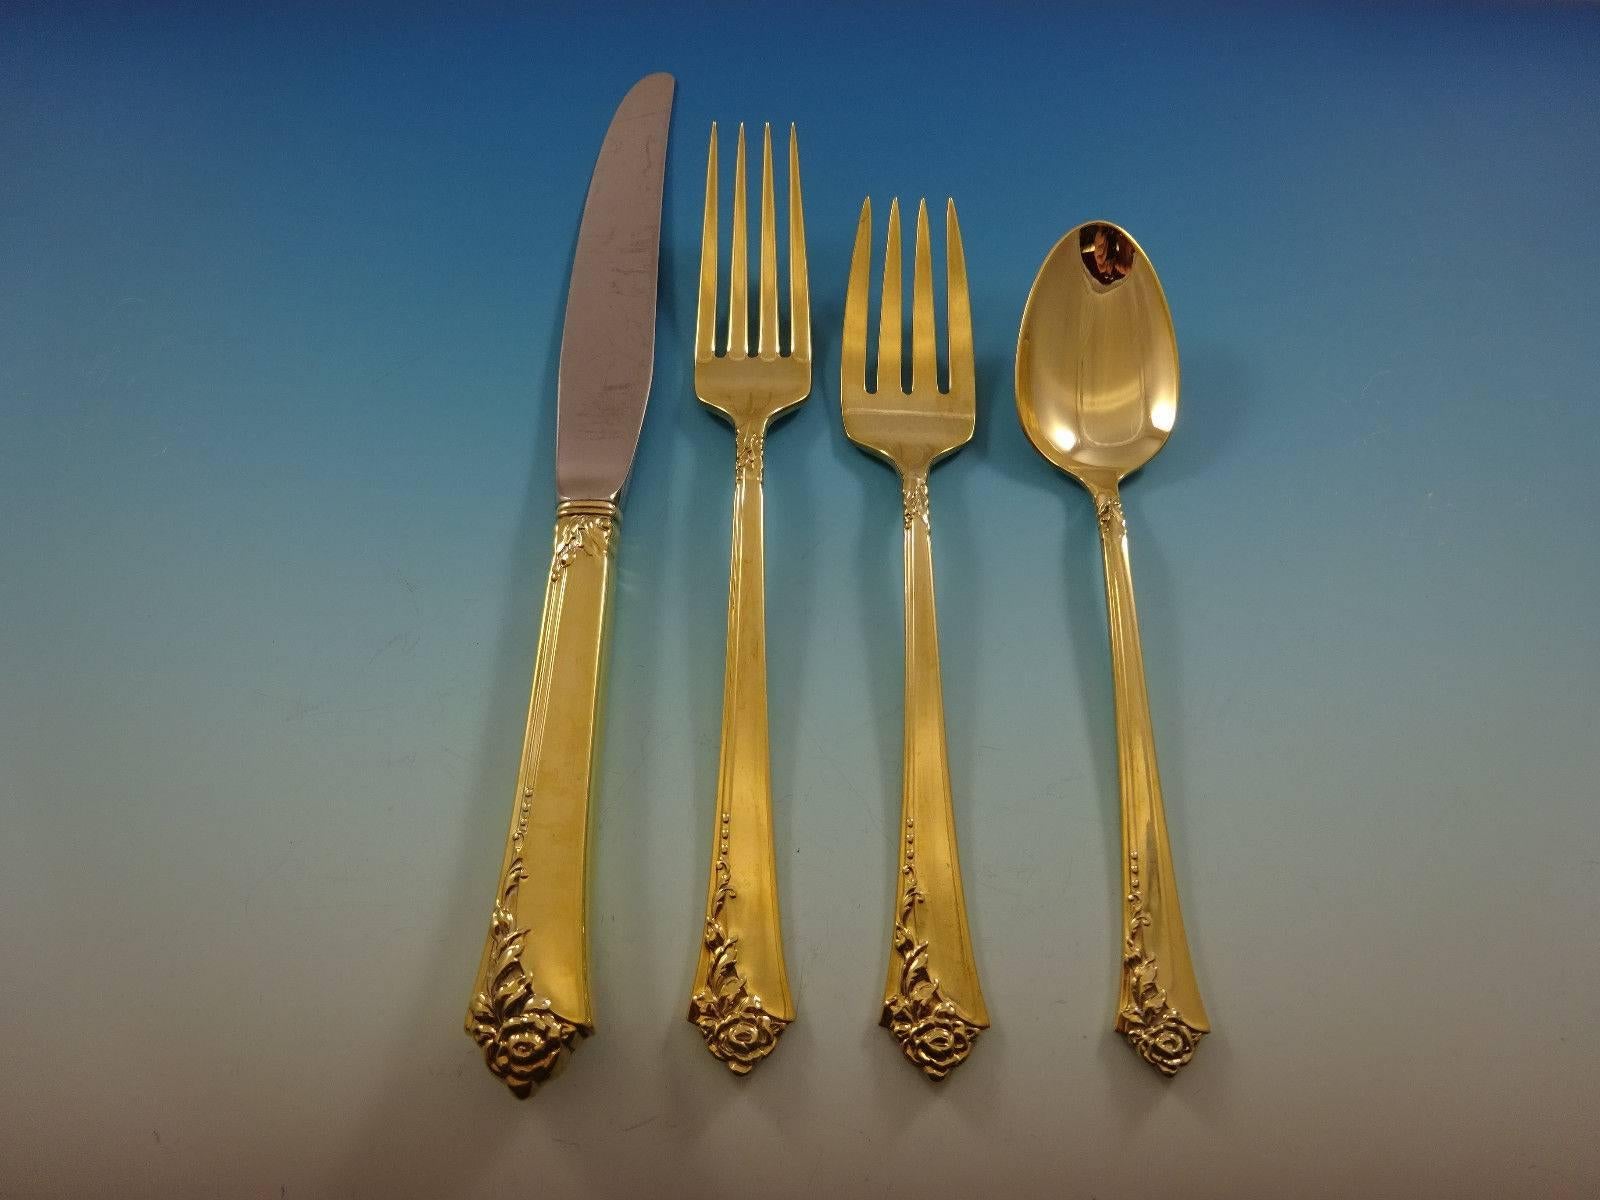 Damask rose gold by Oneida sterling silver flatware set of 48 pieces. Gold flatware is on trend and makes a bold statement on your table. This set is vermeil (completely gold-washed over sterling silver) and includes:
 
12 Knives, 8 7/8